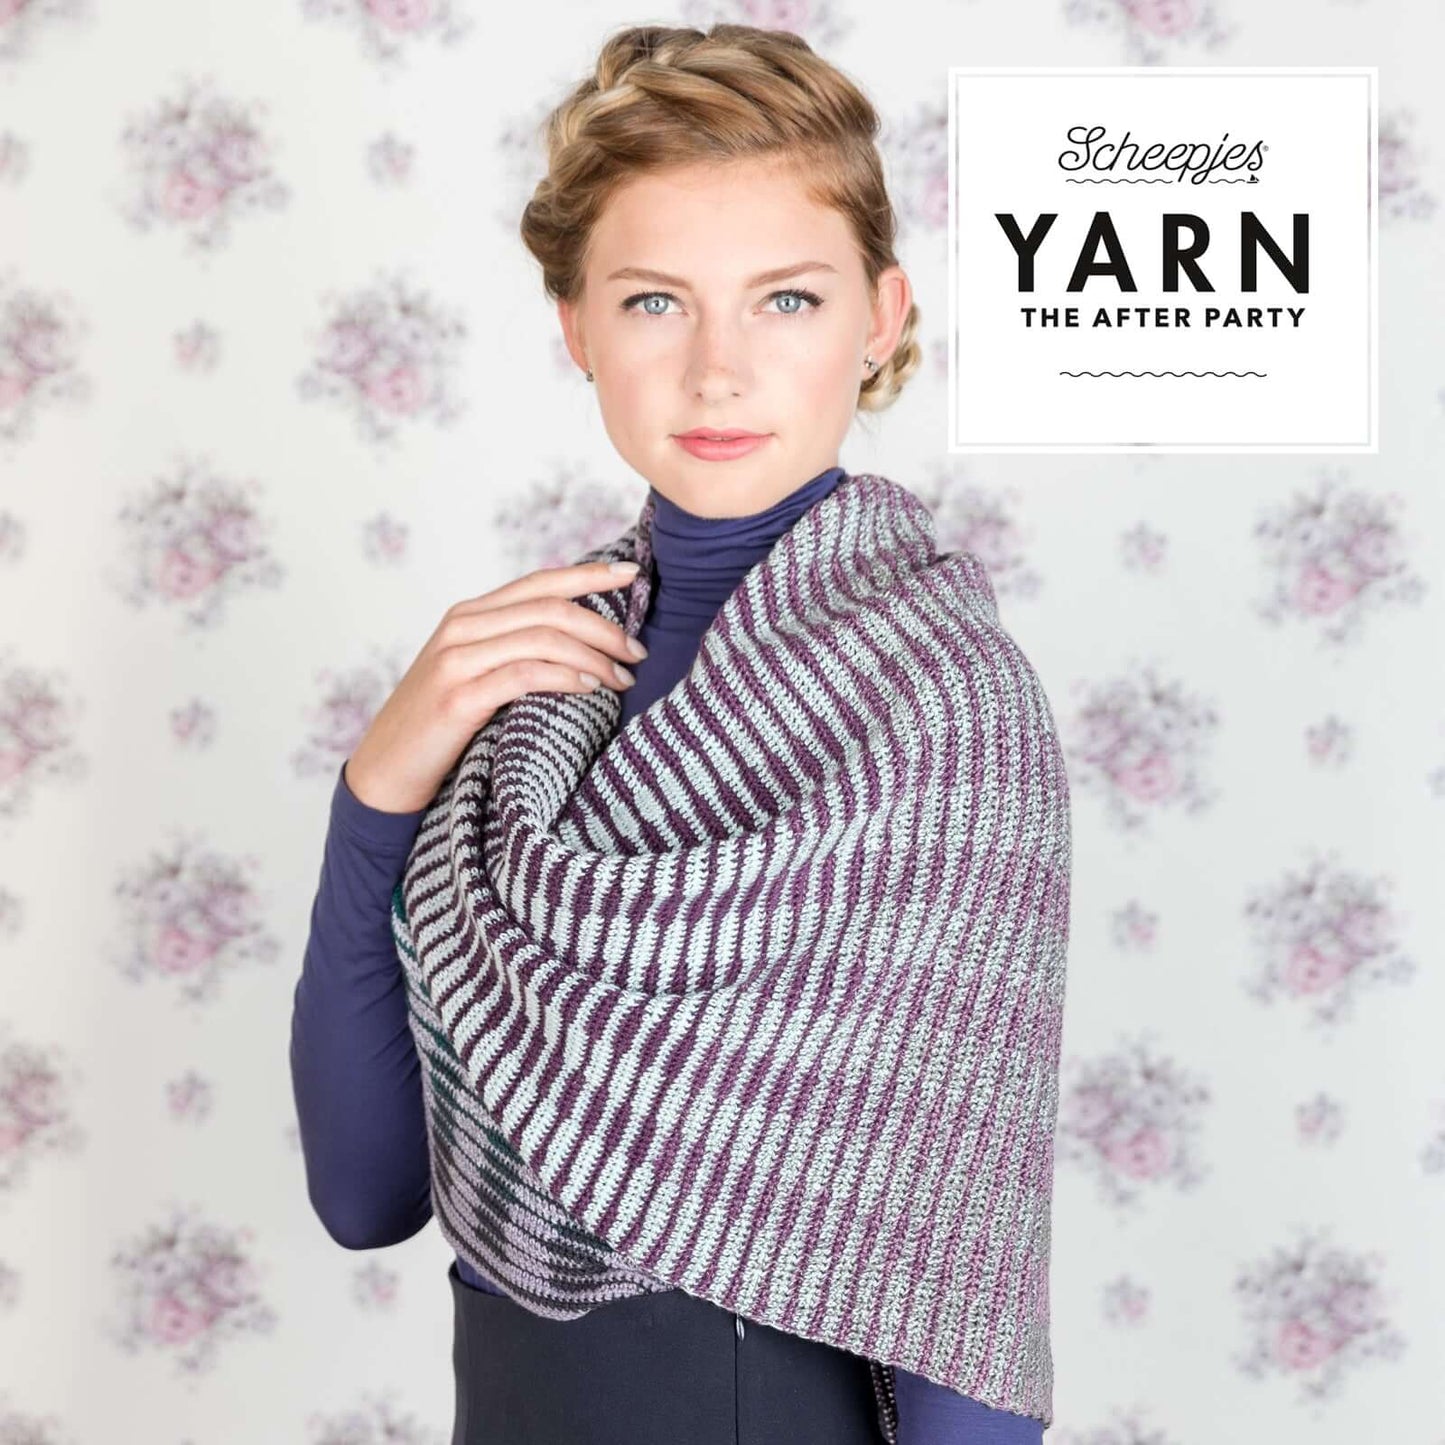 Scheepjes Yarn The After Party no. 18 - Crochet Between The Lines Shawl (booklet) - (Crochet)